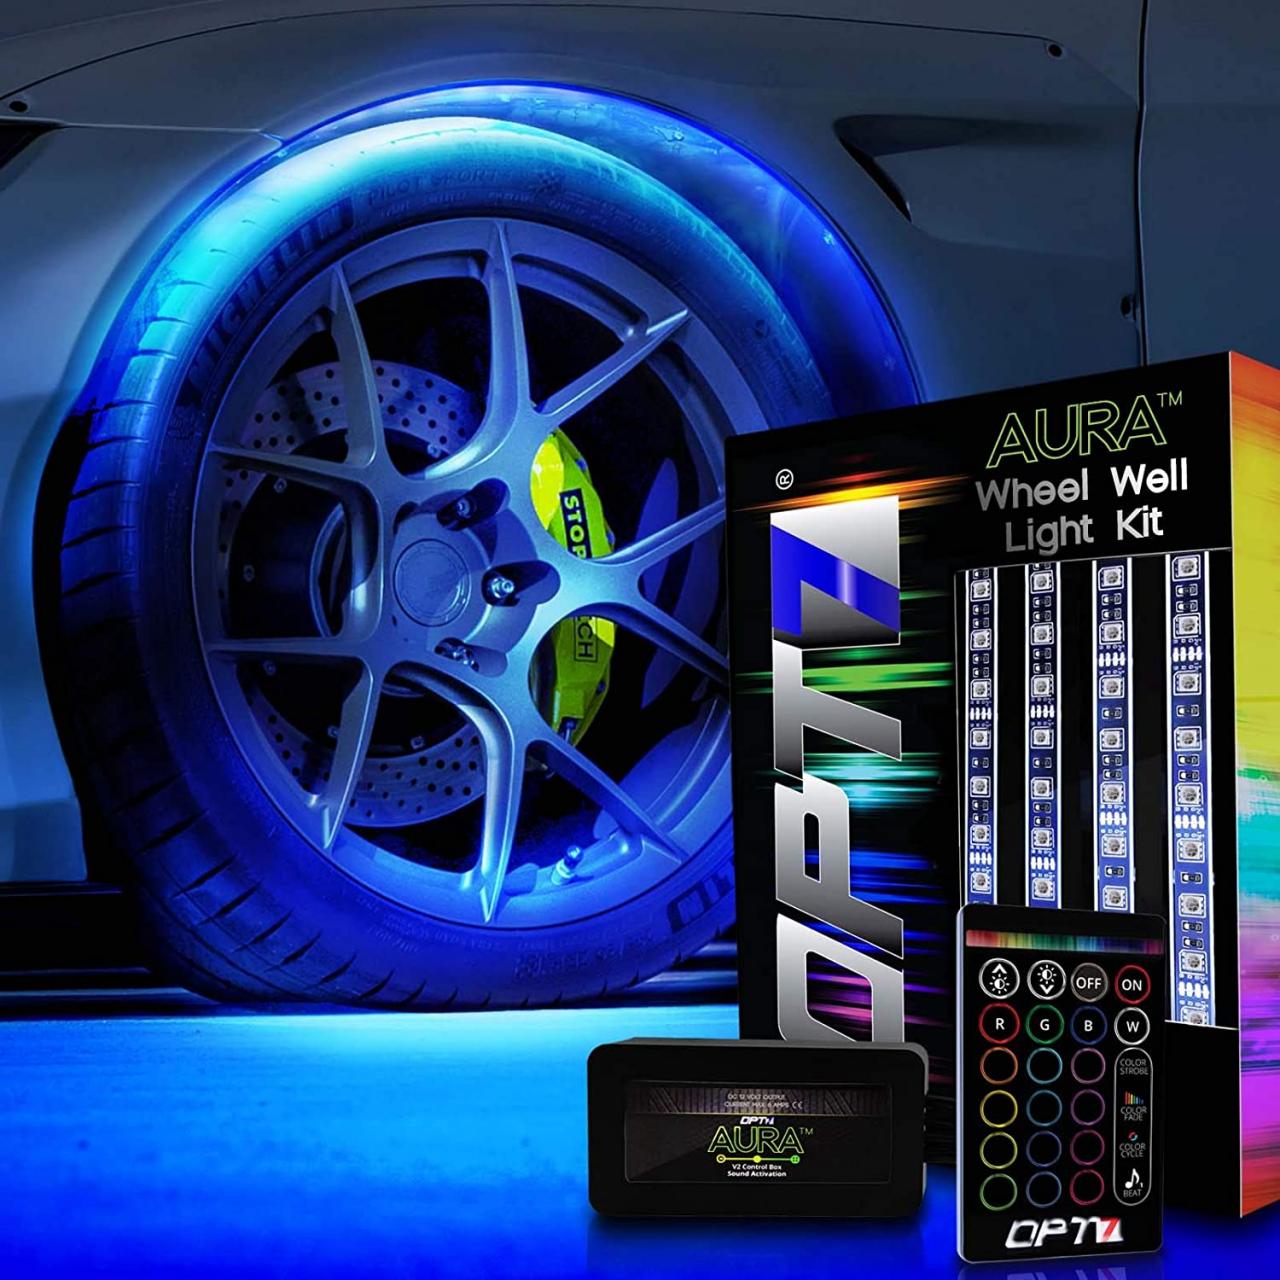 Buy OPT7 Aura Wheel Well RGB LED Kit w/Wireless Remote Lighting Kit,  Multicolor Tire Rim Lights for Cars | 3-Into-1 16+ Smart-Color Waterproof  Strips SoundSync | 24 Inches 12 Volts Online in Vietnam. B00TP8FVK2